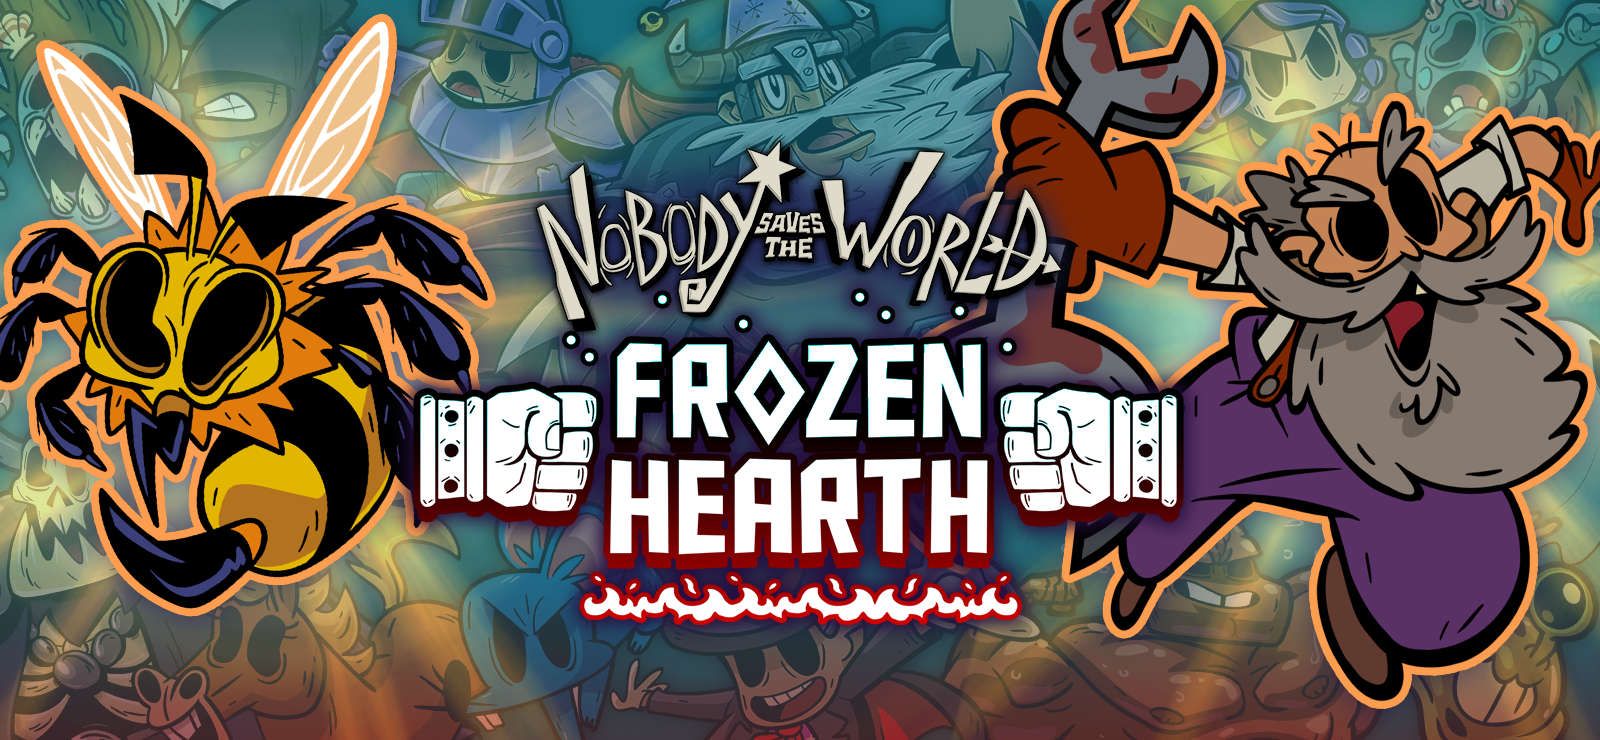 Nobody Saves The World - Frozen Hearth